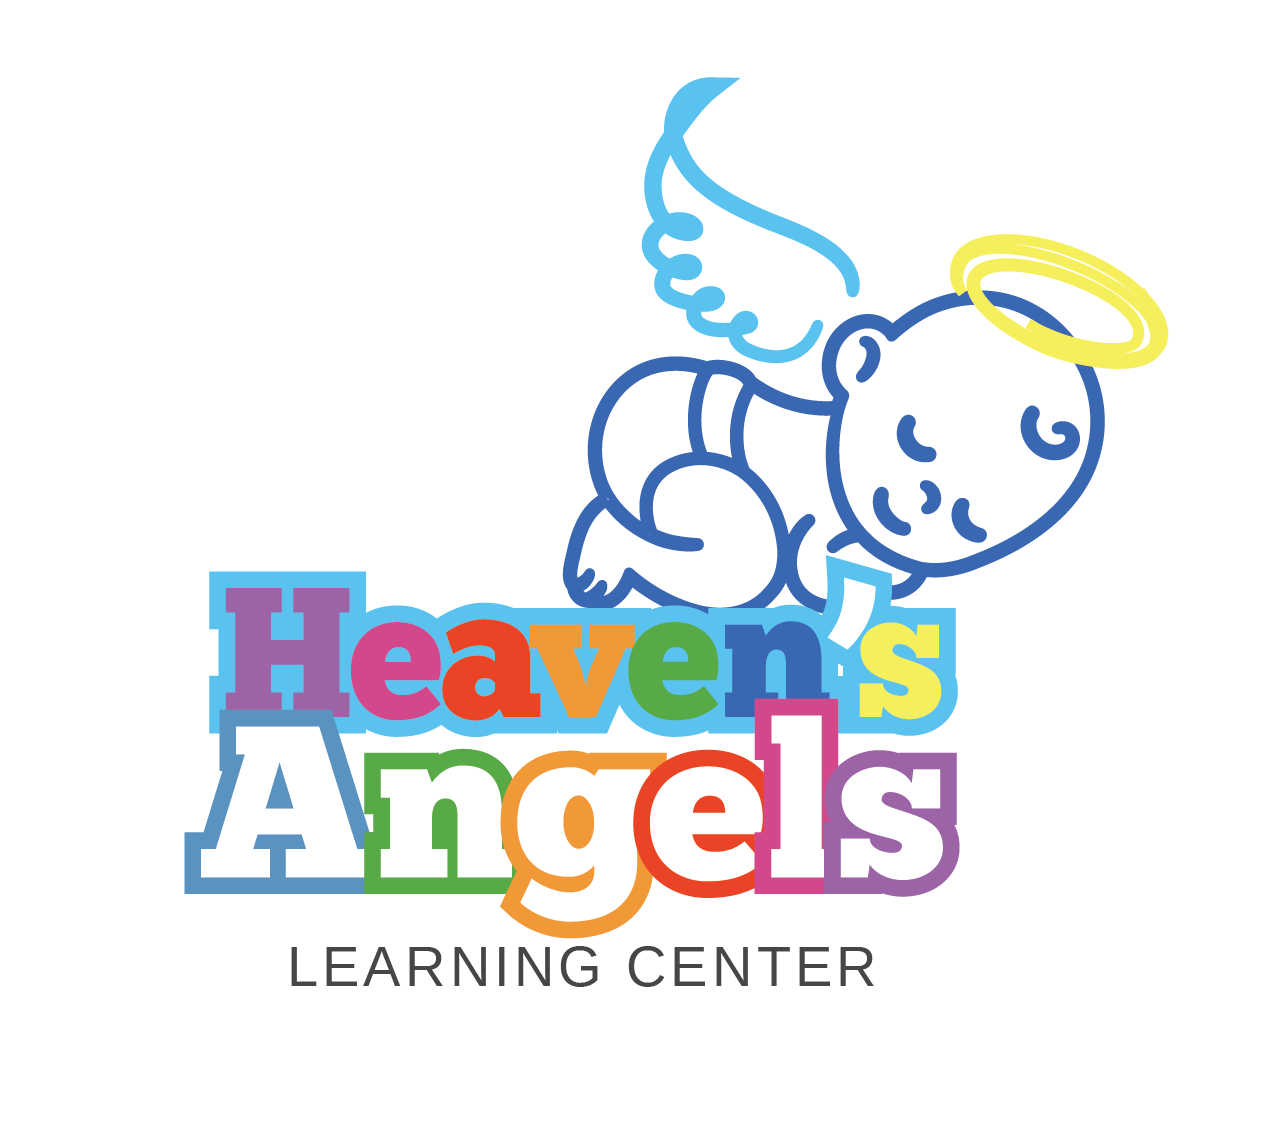 HEAVEN'S ANGELS LEARNING CENTER